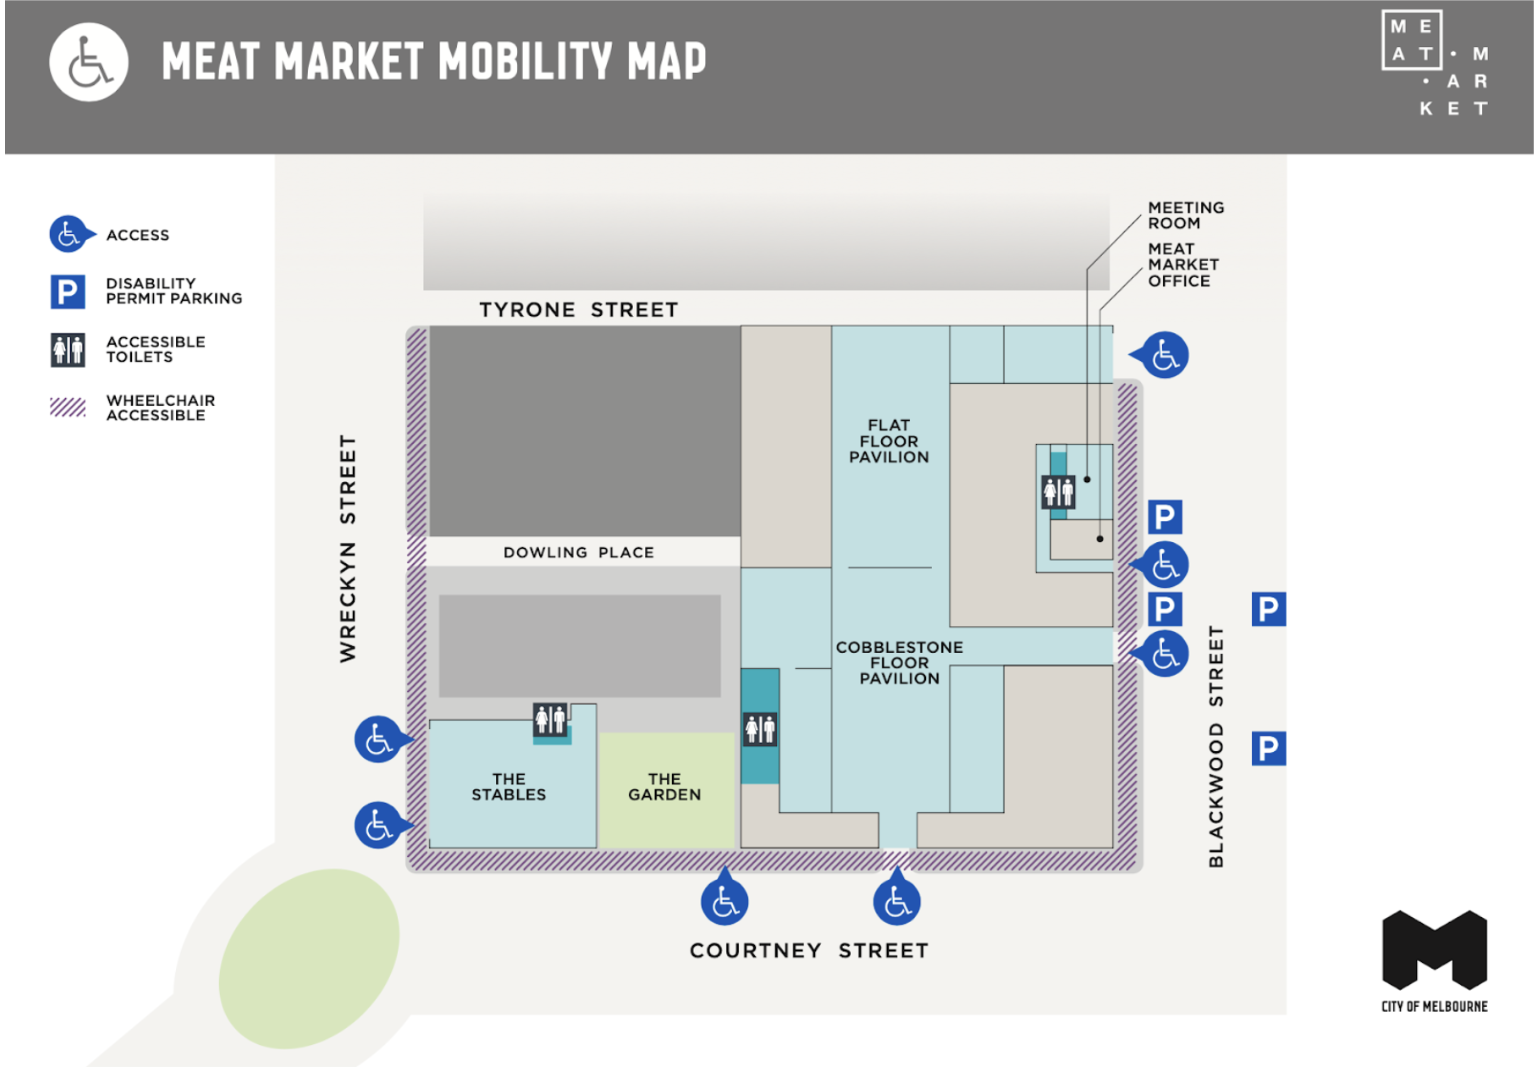 Image description: A pdf image of Meat Market Mobility Map showing a floorplan with accessible toilets located within the Meat Market building. This map can be downloaded via this link. Image ends.